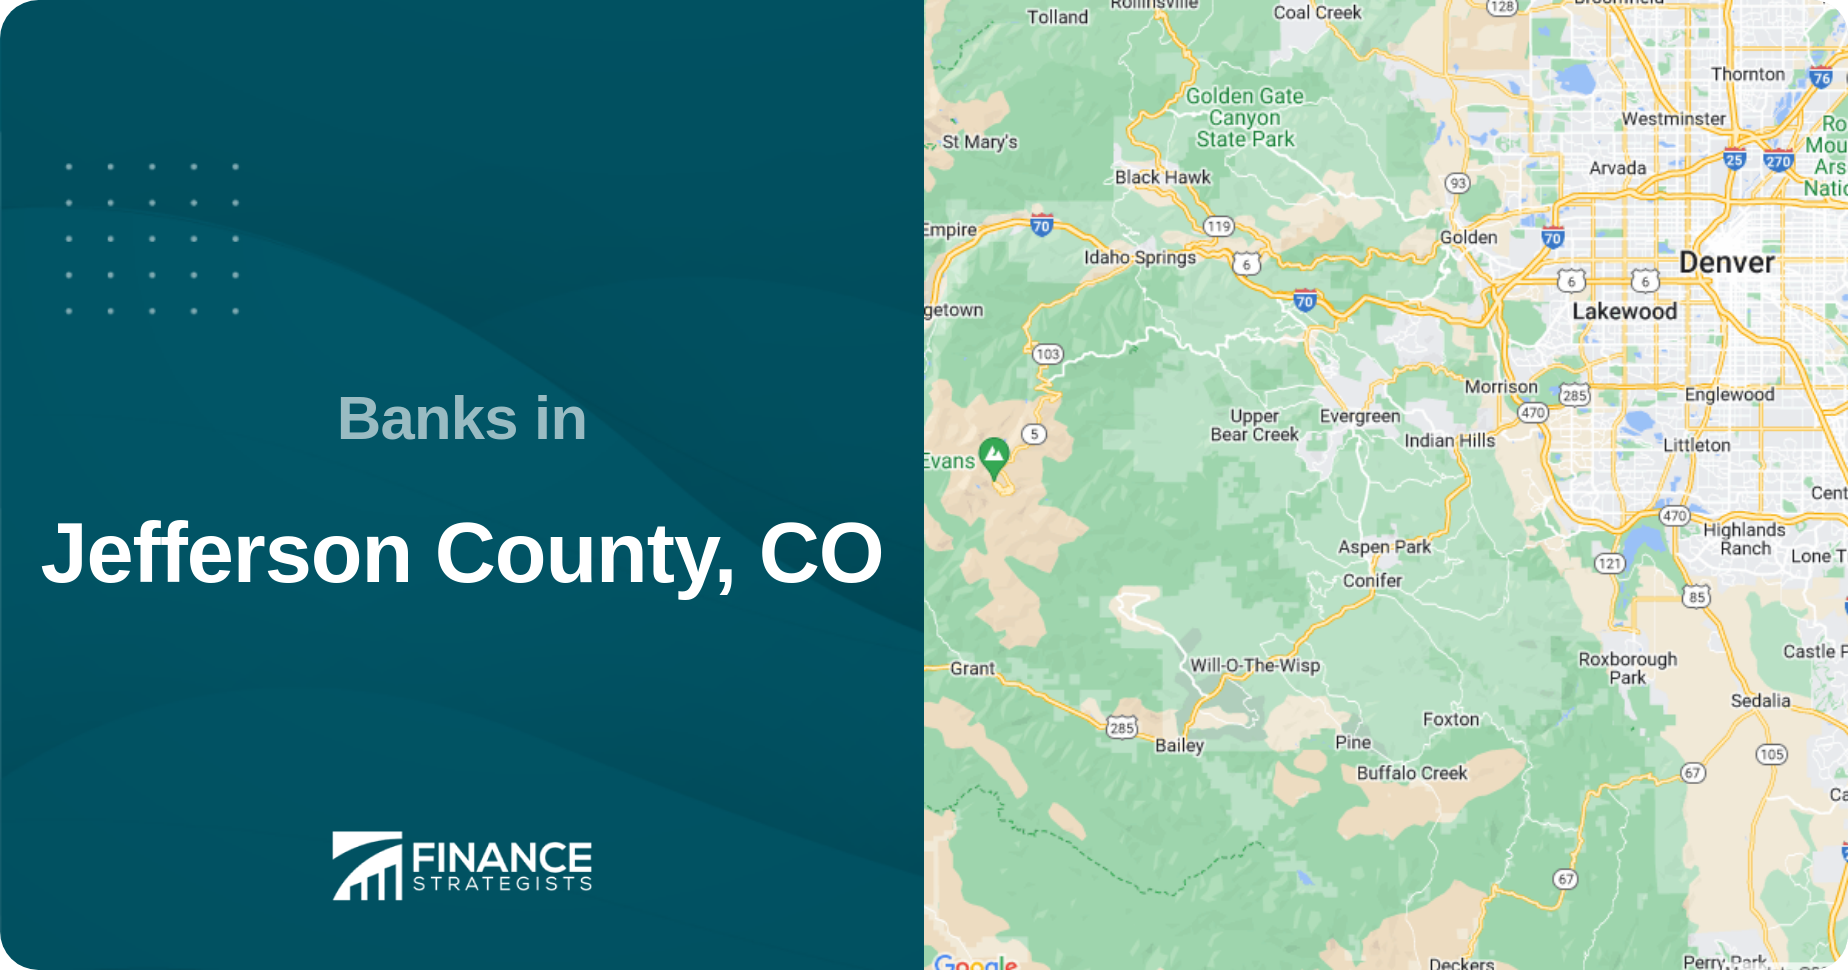 Banks in Jefferson County, CO